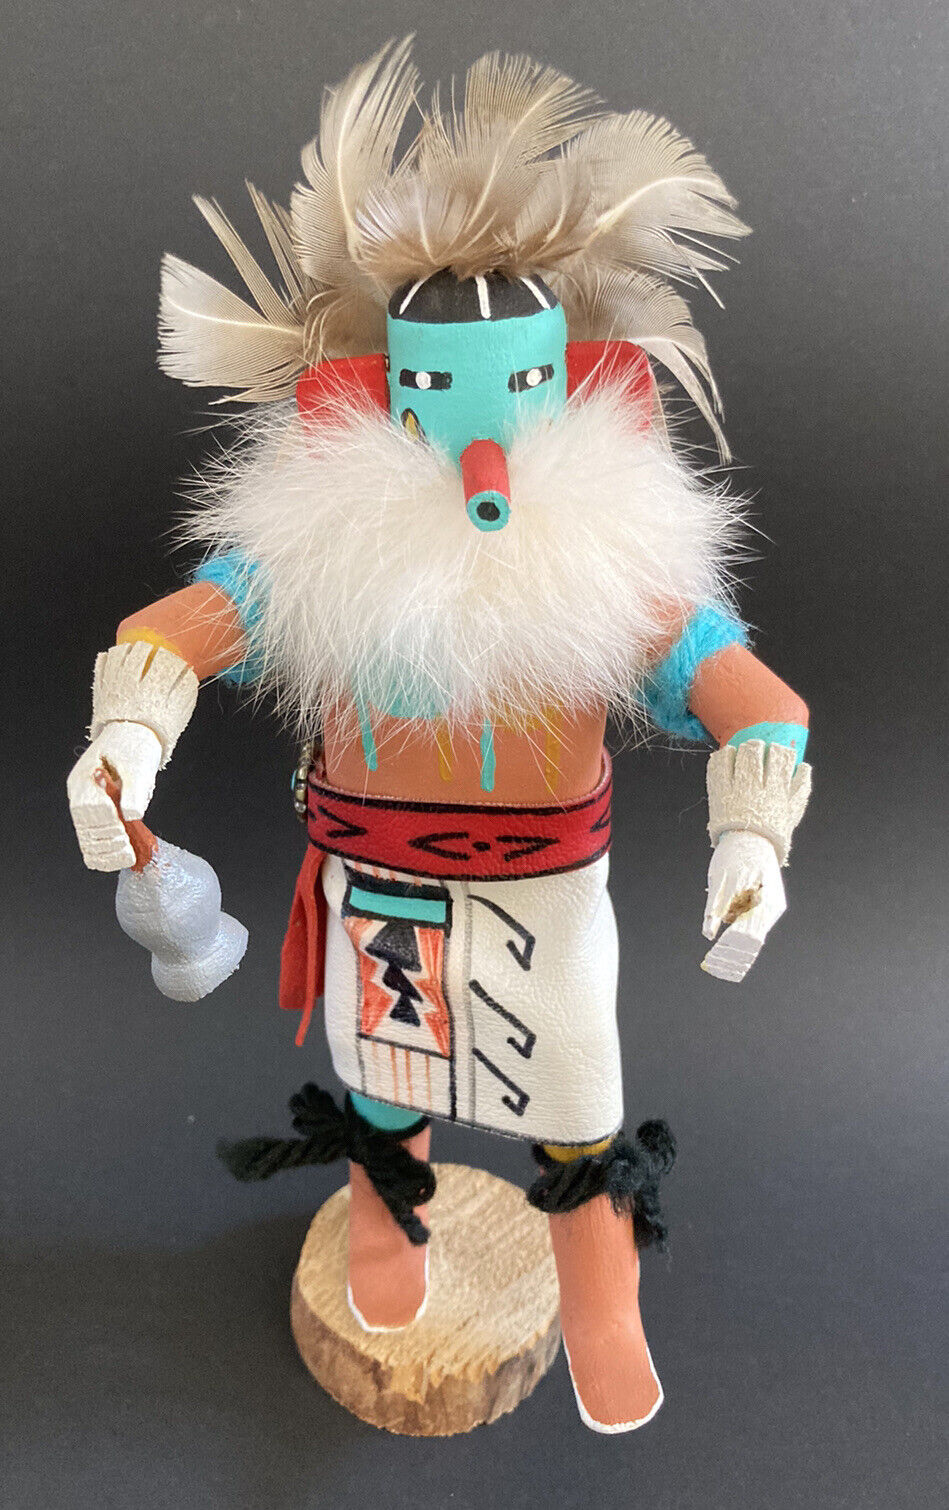 Kachina Hand Made Early Morning Singer Signed By P.h. 7-8” Tall